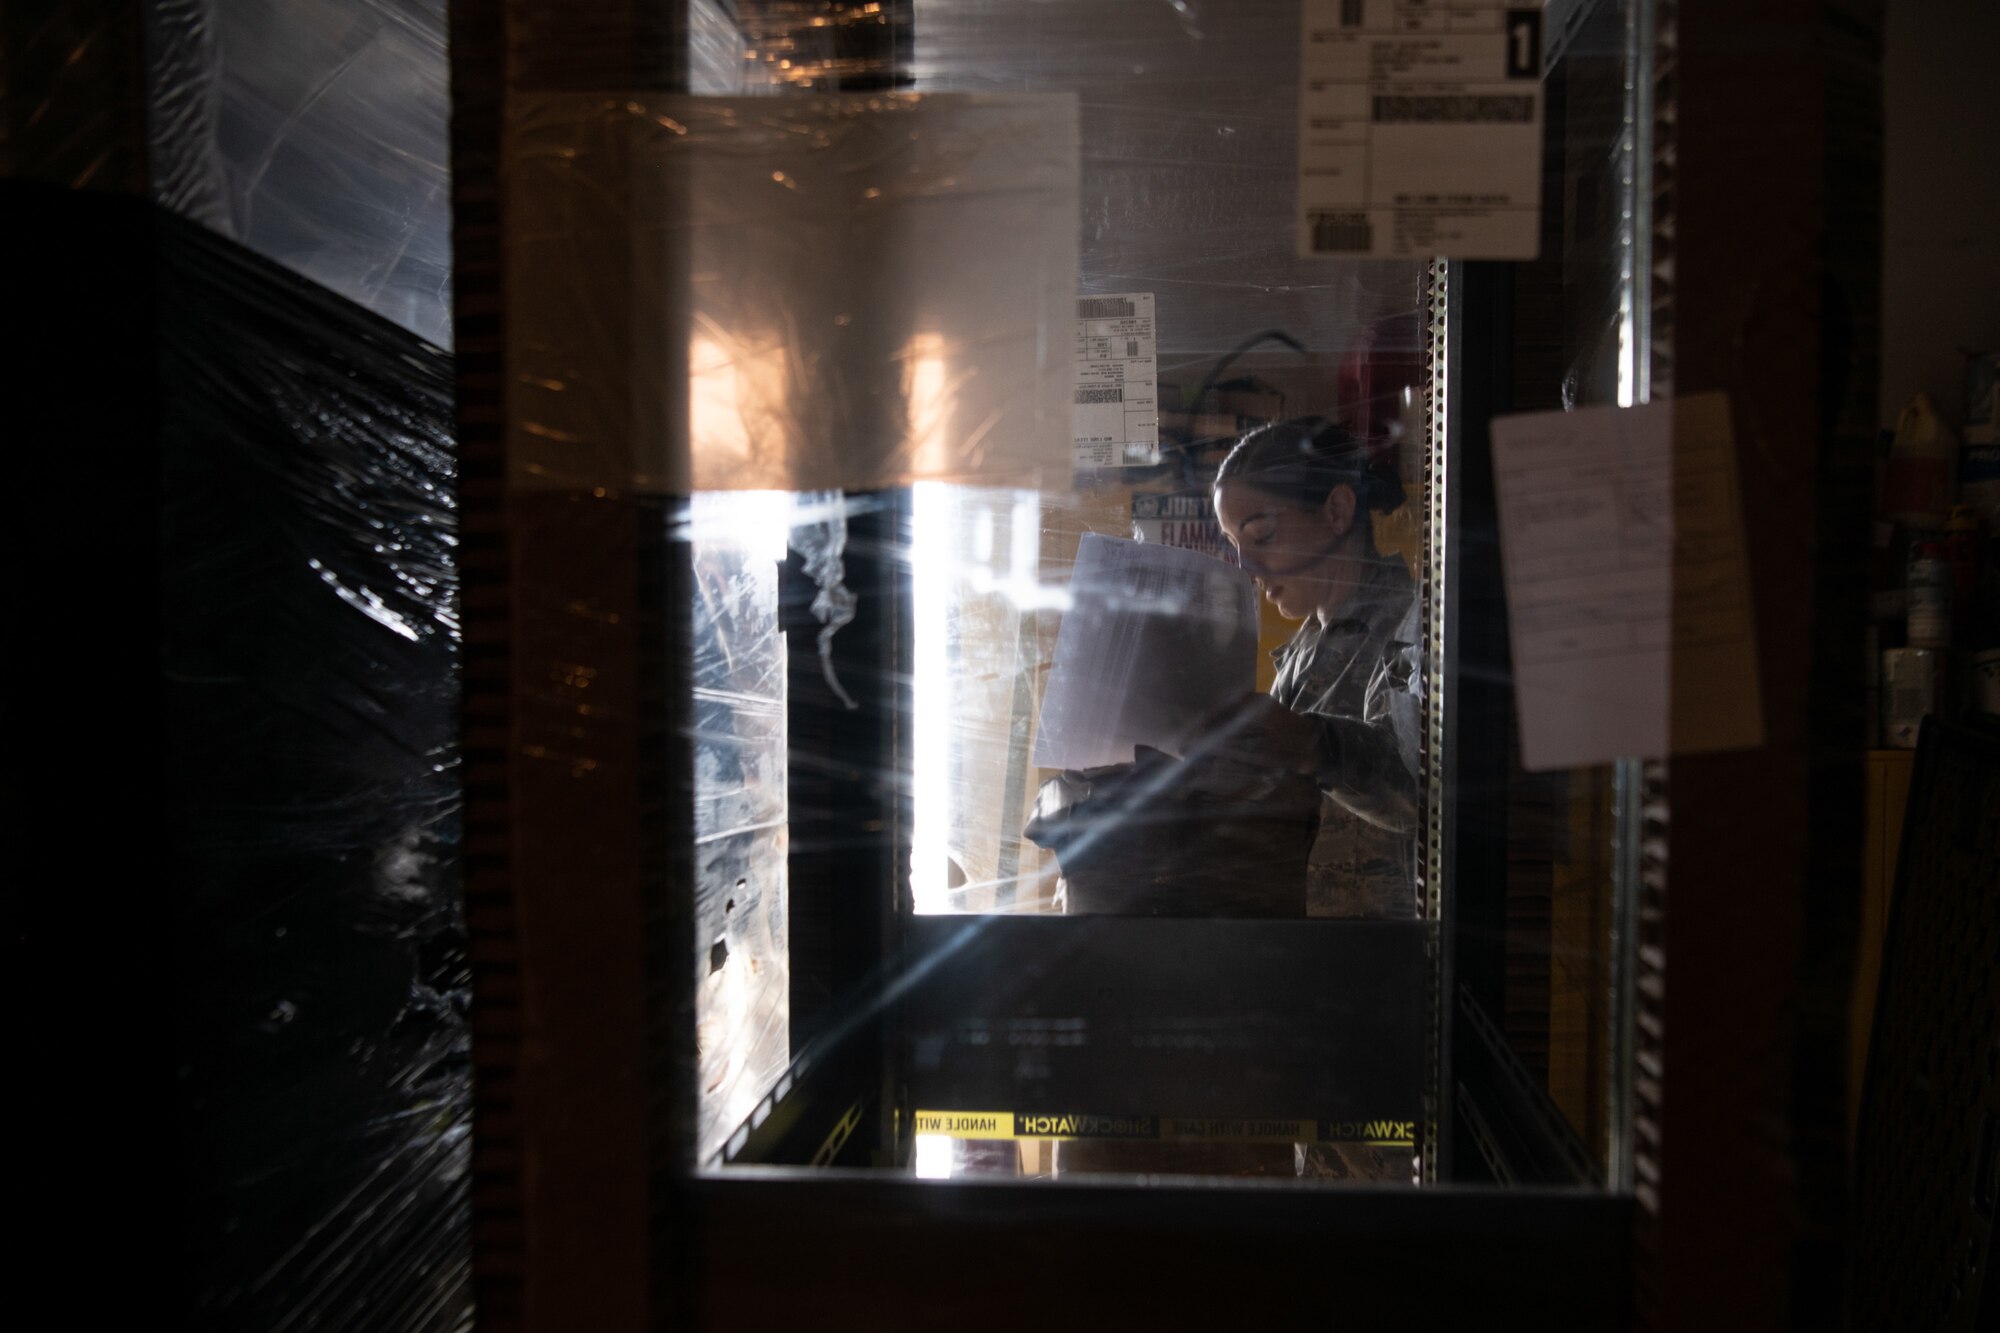 Tech. Sgt. Allison Dzon, cable antenna systems Airman for the 205th Engineering and Installation Squadron and team chief for the installation project, goes through an inventory list as she checks off the plastic-wrapped racks in a storeroom at Andersen Air Force Base in Guam on Sept. 9, 2019. The 205th EIS out of Oklahoma City had seven Airmen working to install ten CM-300/350 radios on racks in the 36th Operations Support Squadron air traffic control tower in Guam as part of the U.S. Air Force Air Traffic Control and Landing Systems Radio Replacement Program. (U.S. Air National Guard photo by Staff Sgt. Brigette Waltermire)